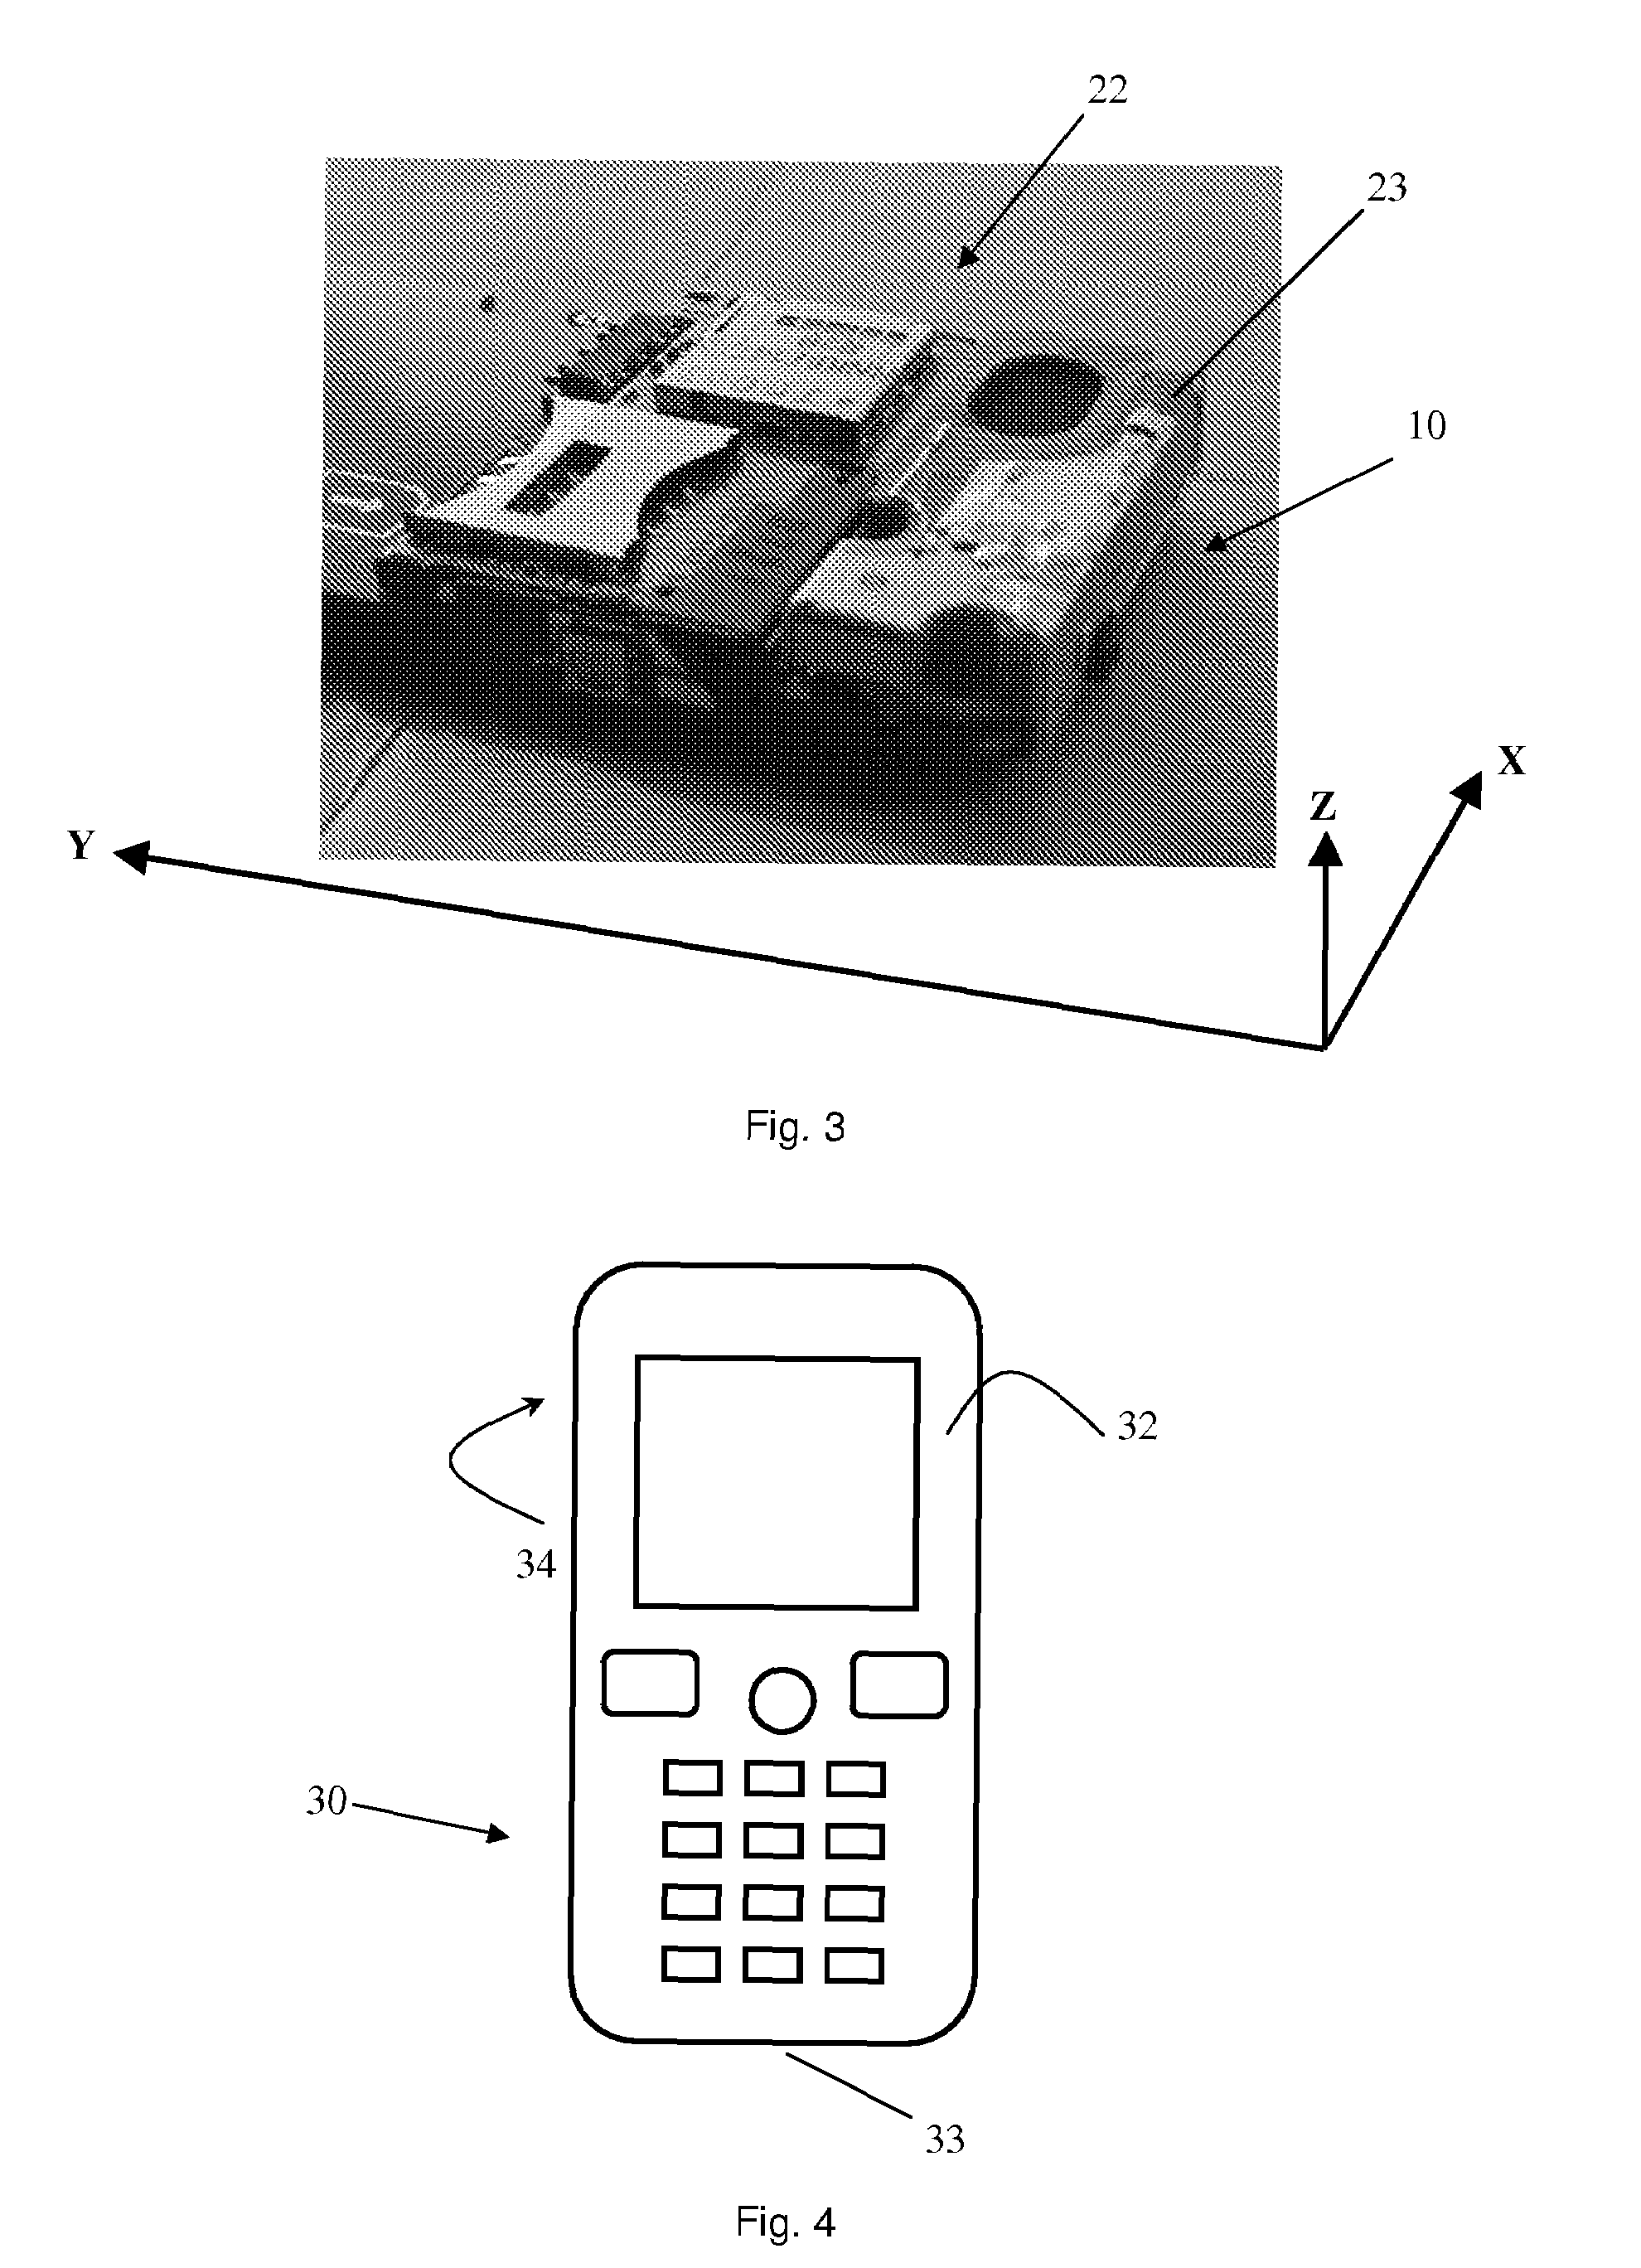 Carrier and device